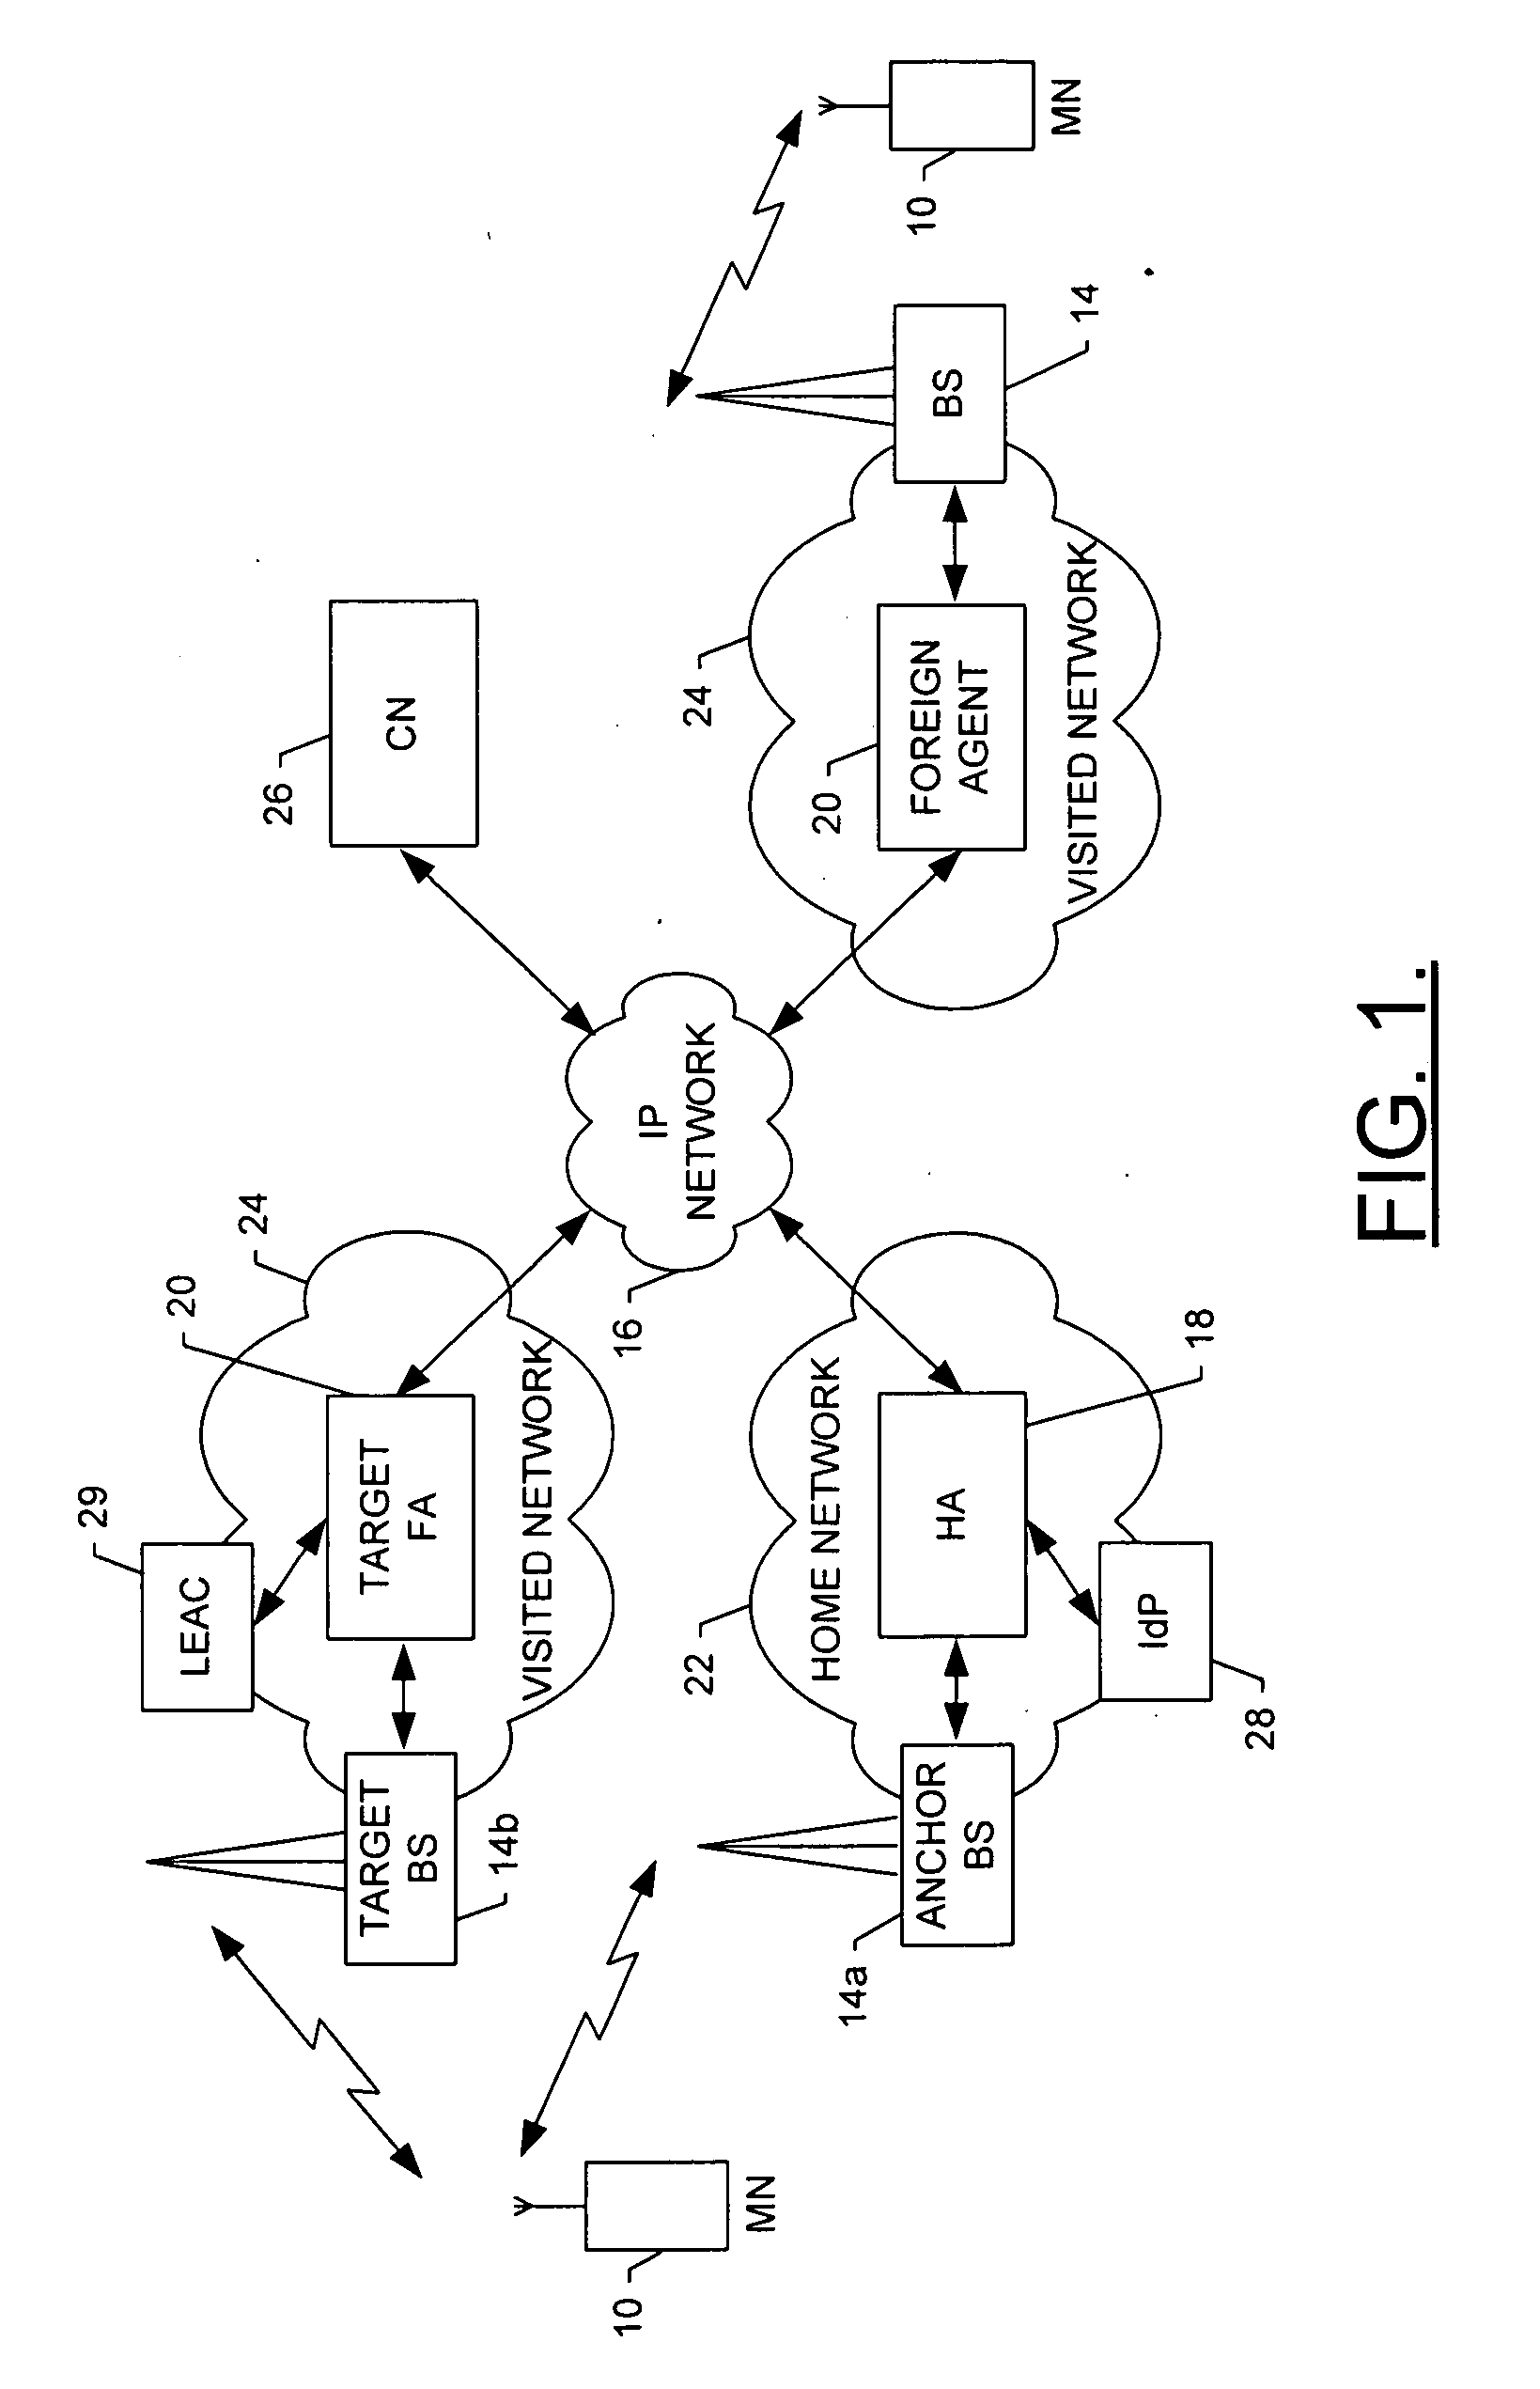 System and method for effectuating a connection to a network